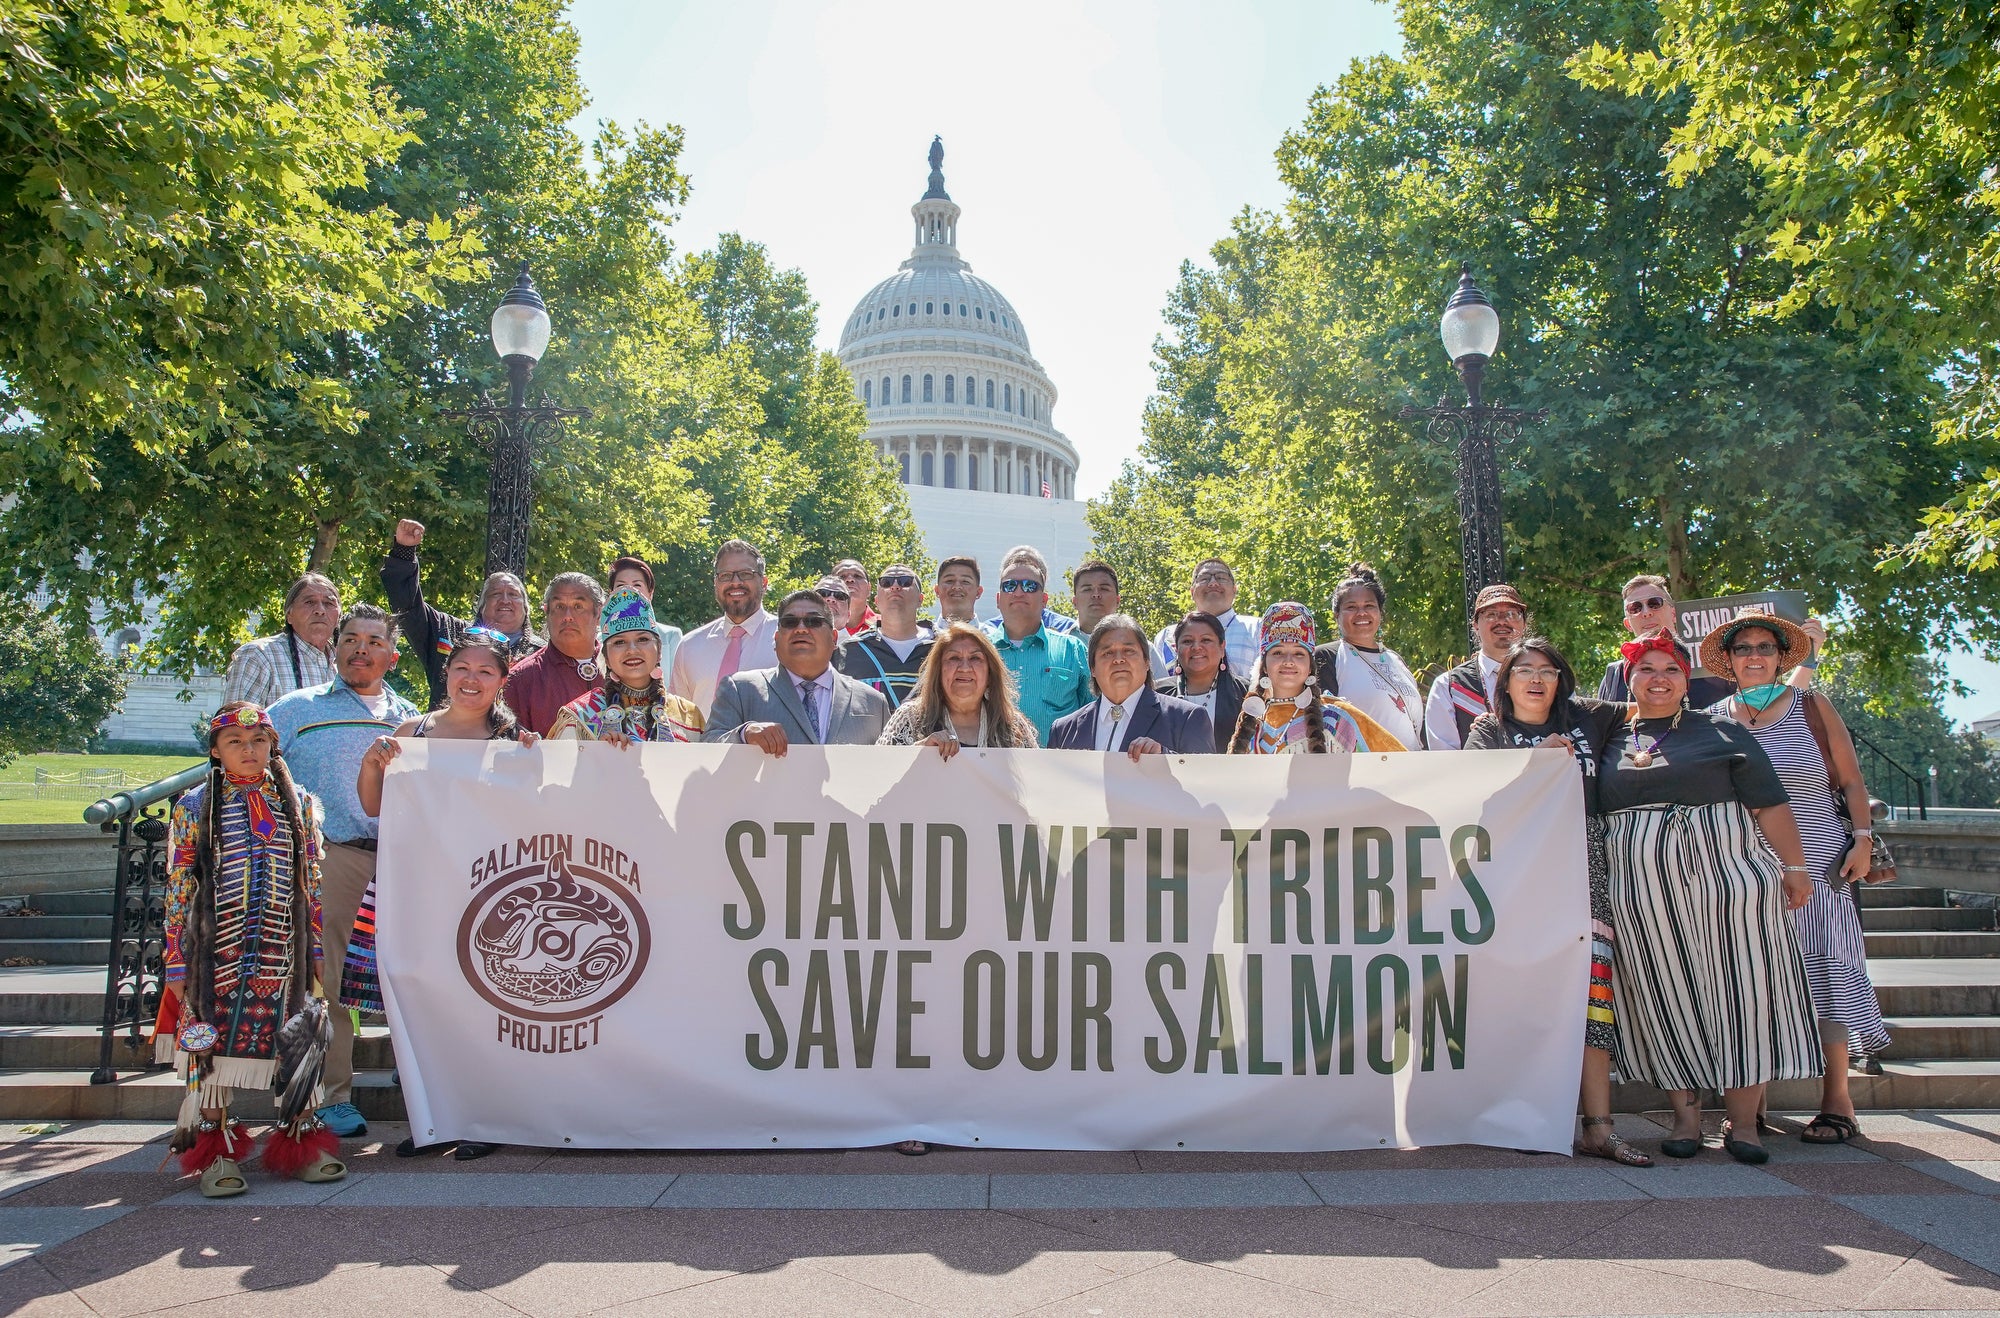 A group of people stand in front of the U.S. Capitol with a banner that reads "Stand with tribes save our salmon"